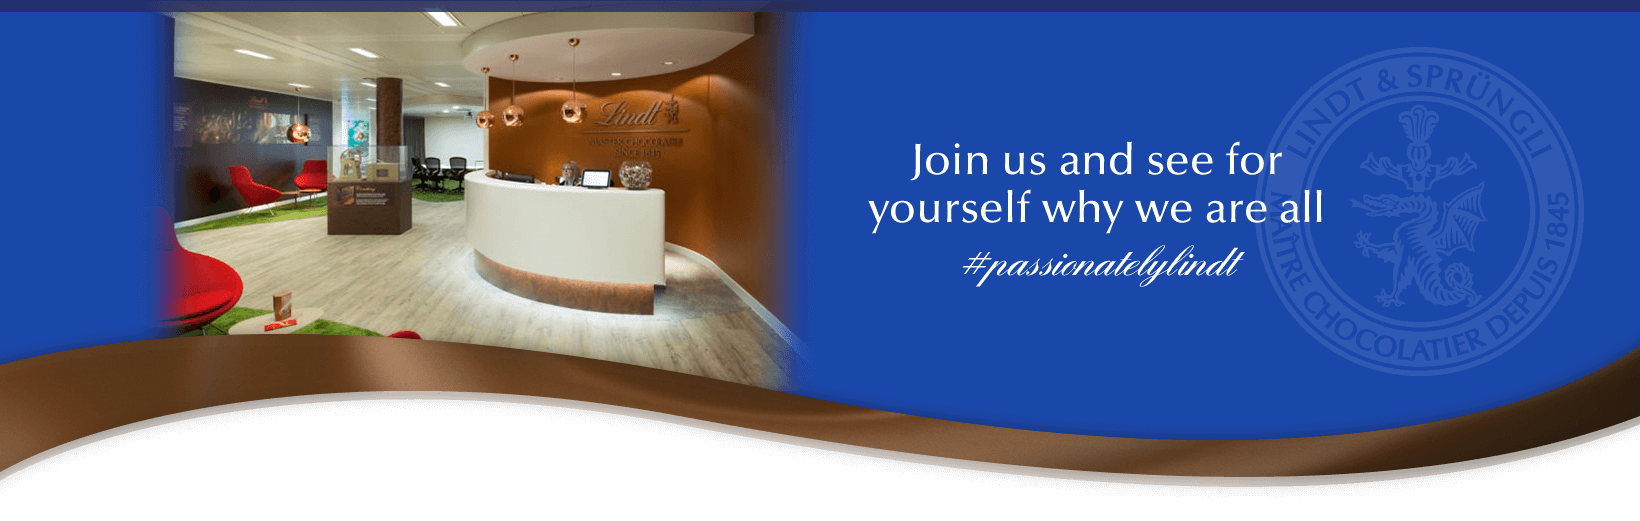 Join us and see for yourself why we are all #passionatelylindt